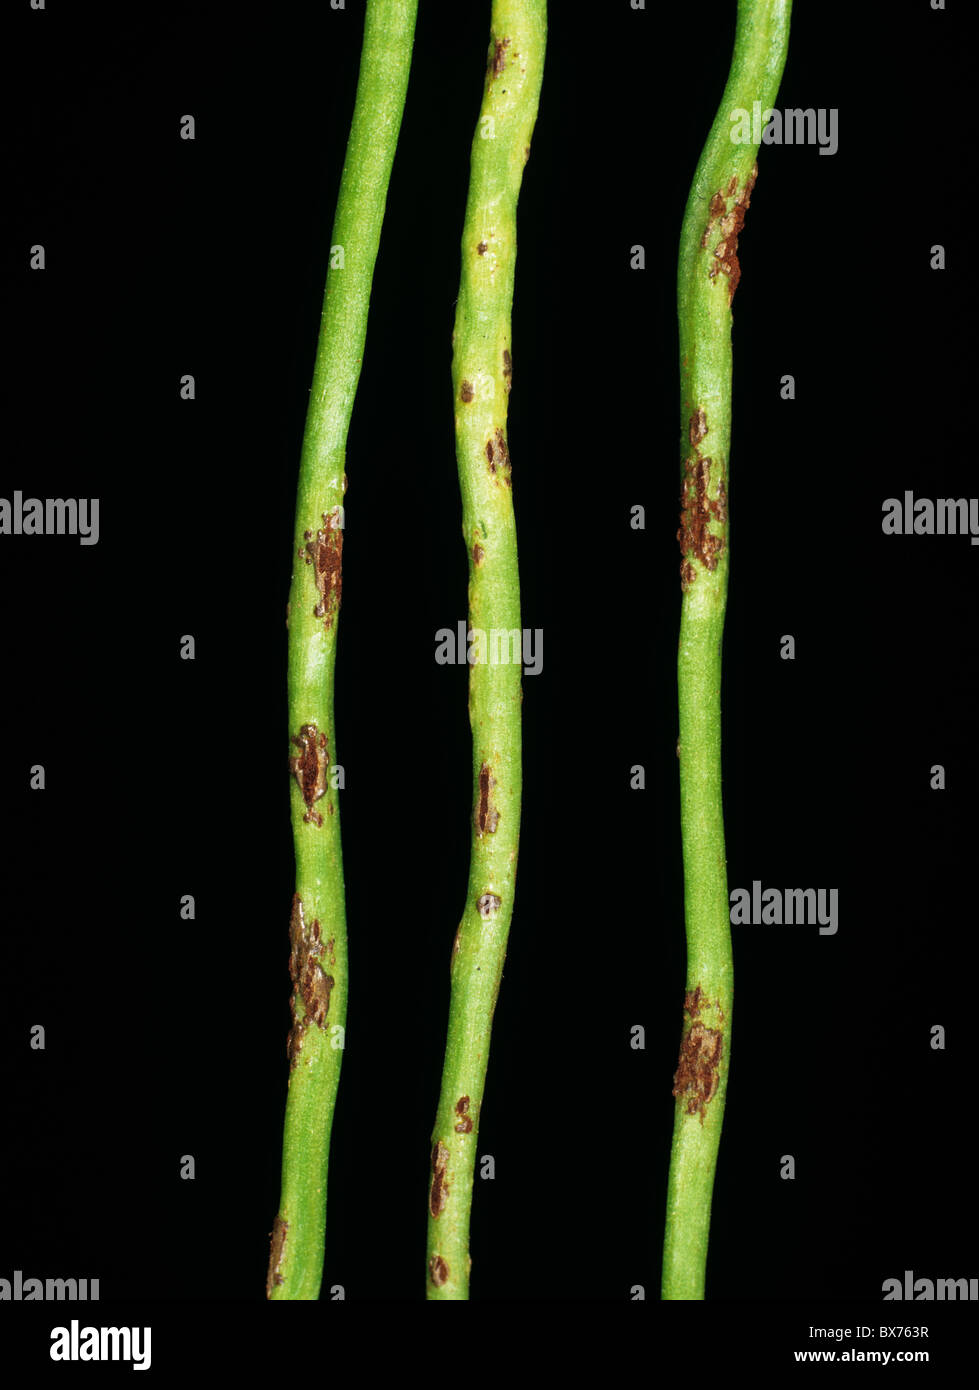 Clover rust (Uromyces nerviphilus) pustules on the underside of white clover petioles Stock Photo